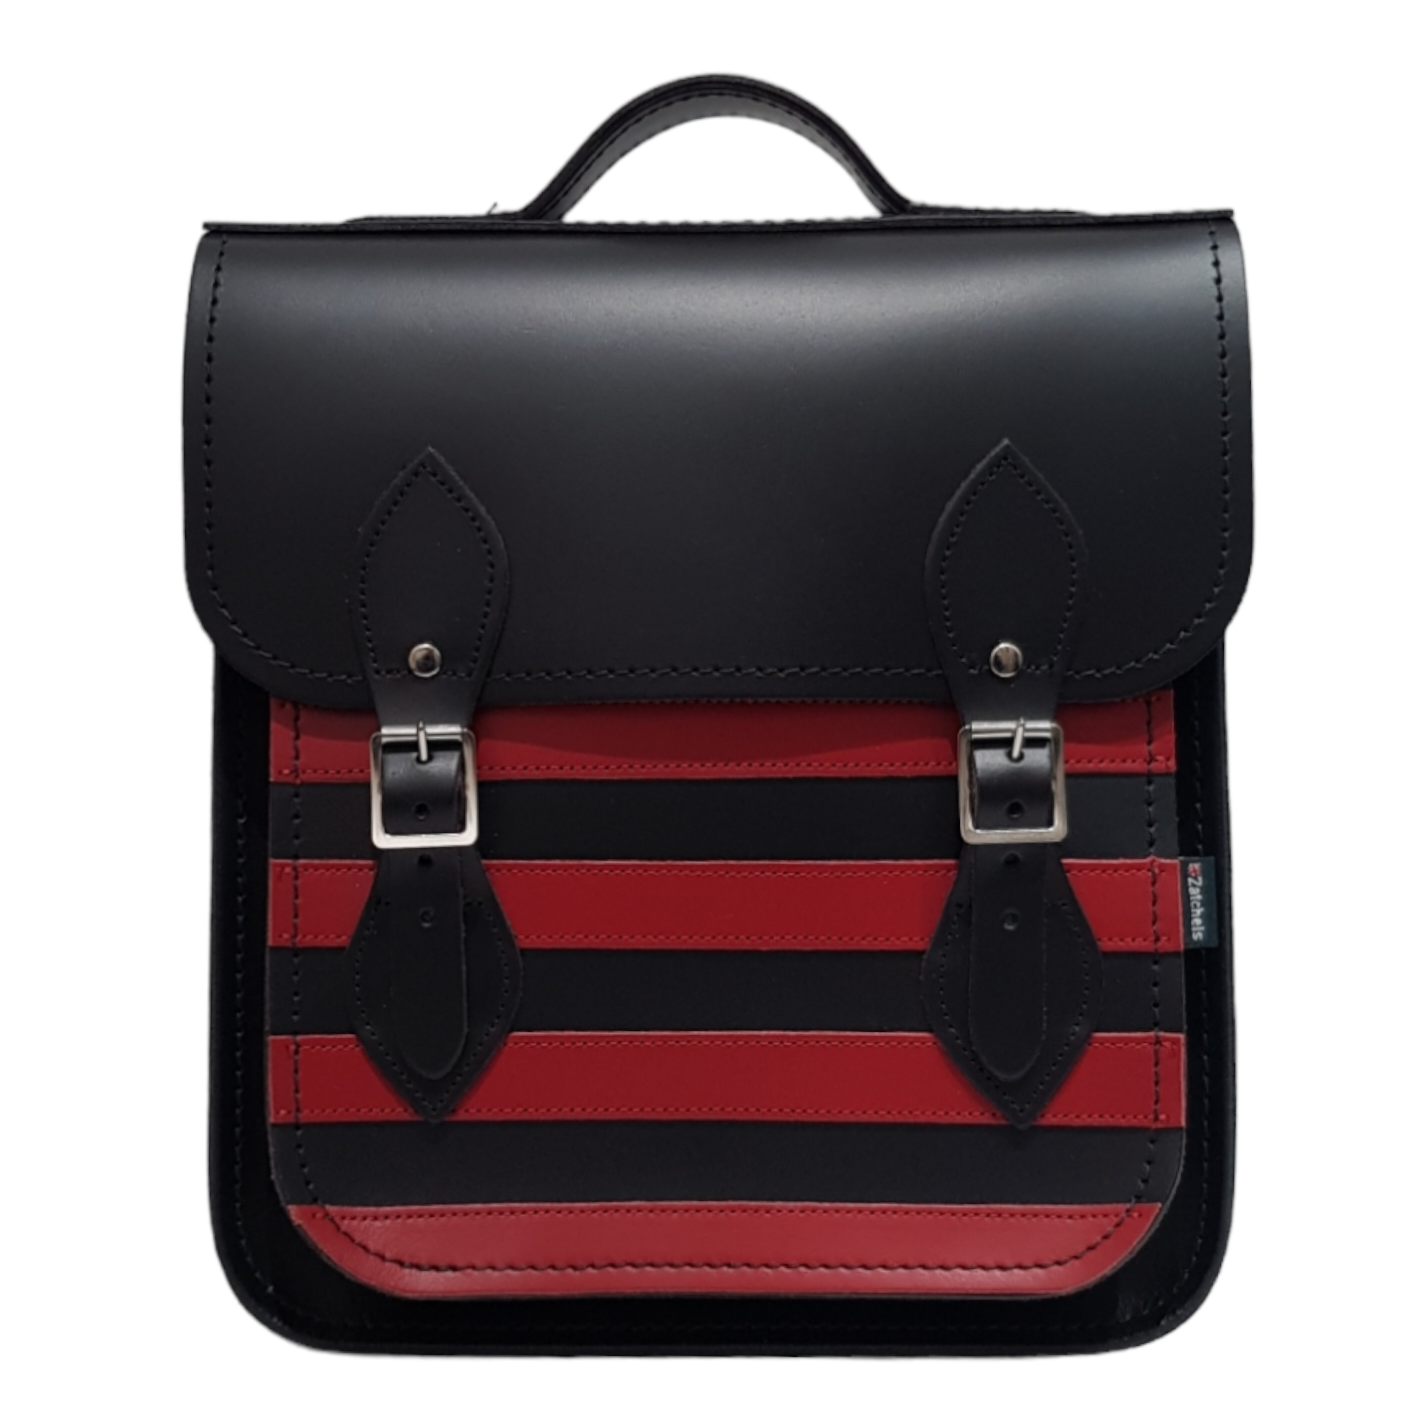 Handmade Leather City Backpack - Gothic Striped Red & Black - Small